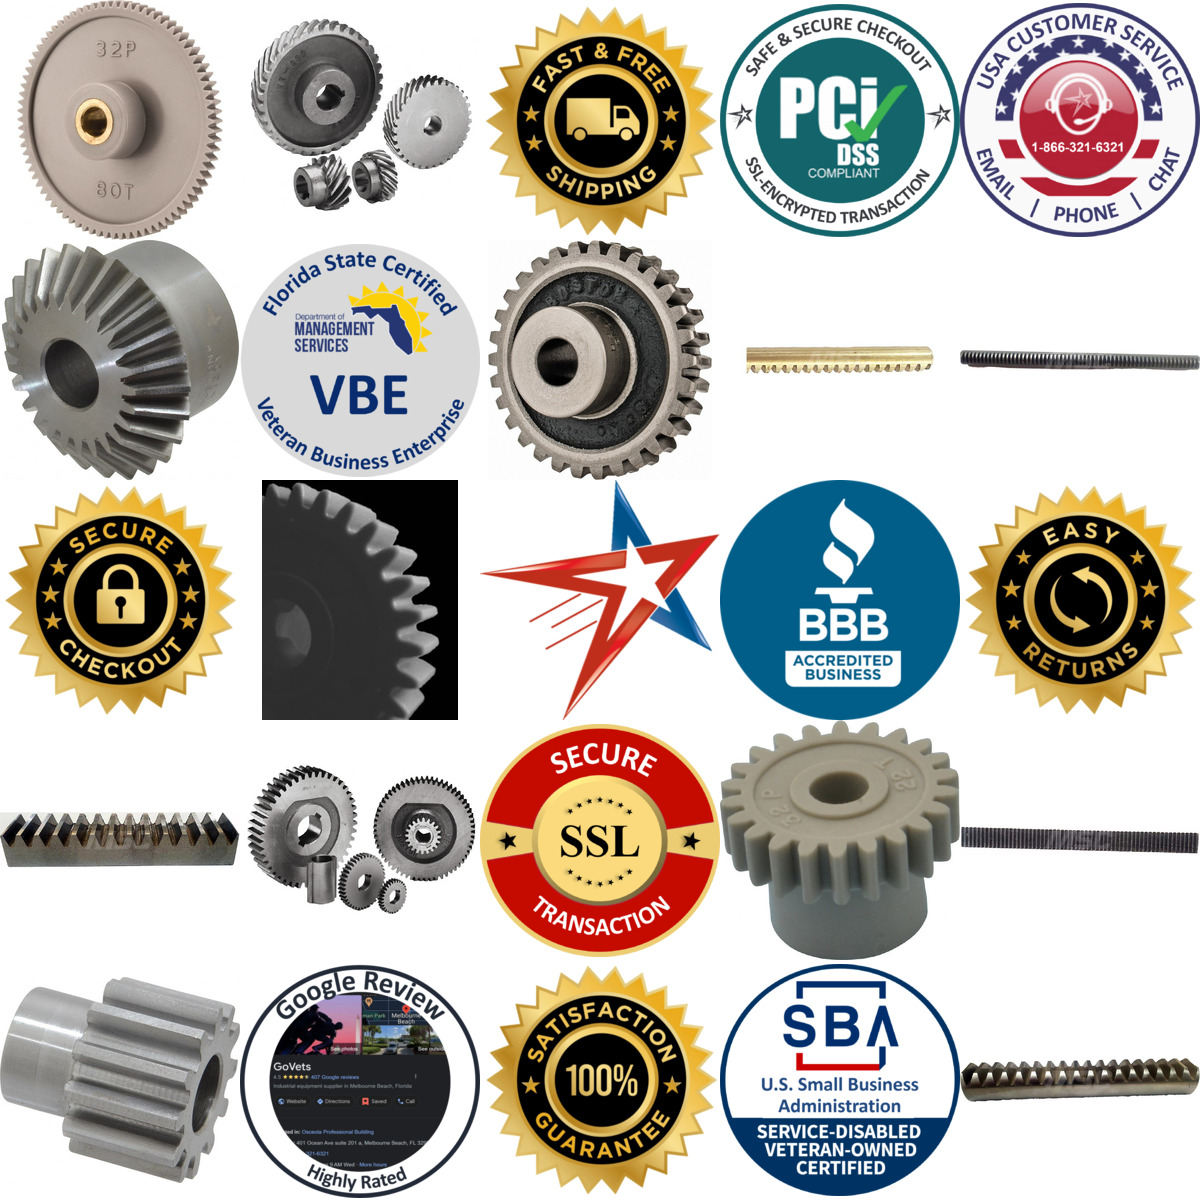 A selection of Gears Gear Bushings and Racks products on GoVets